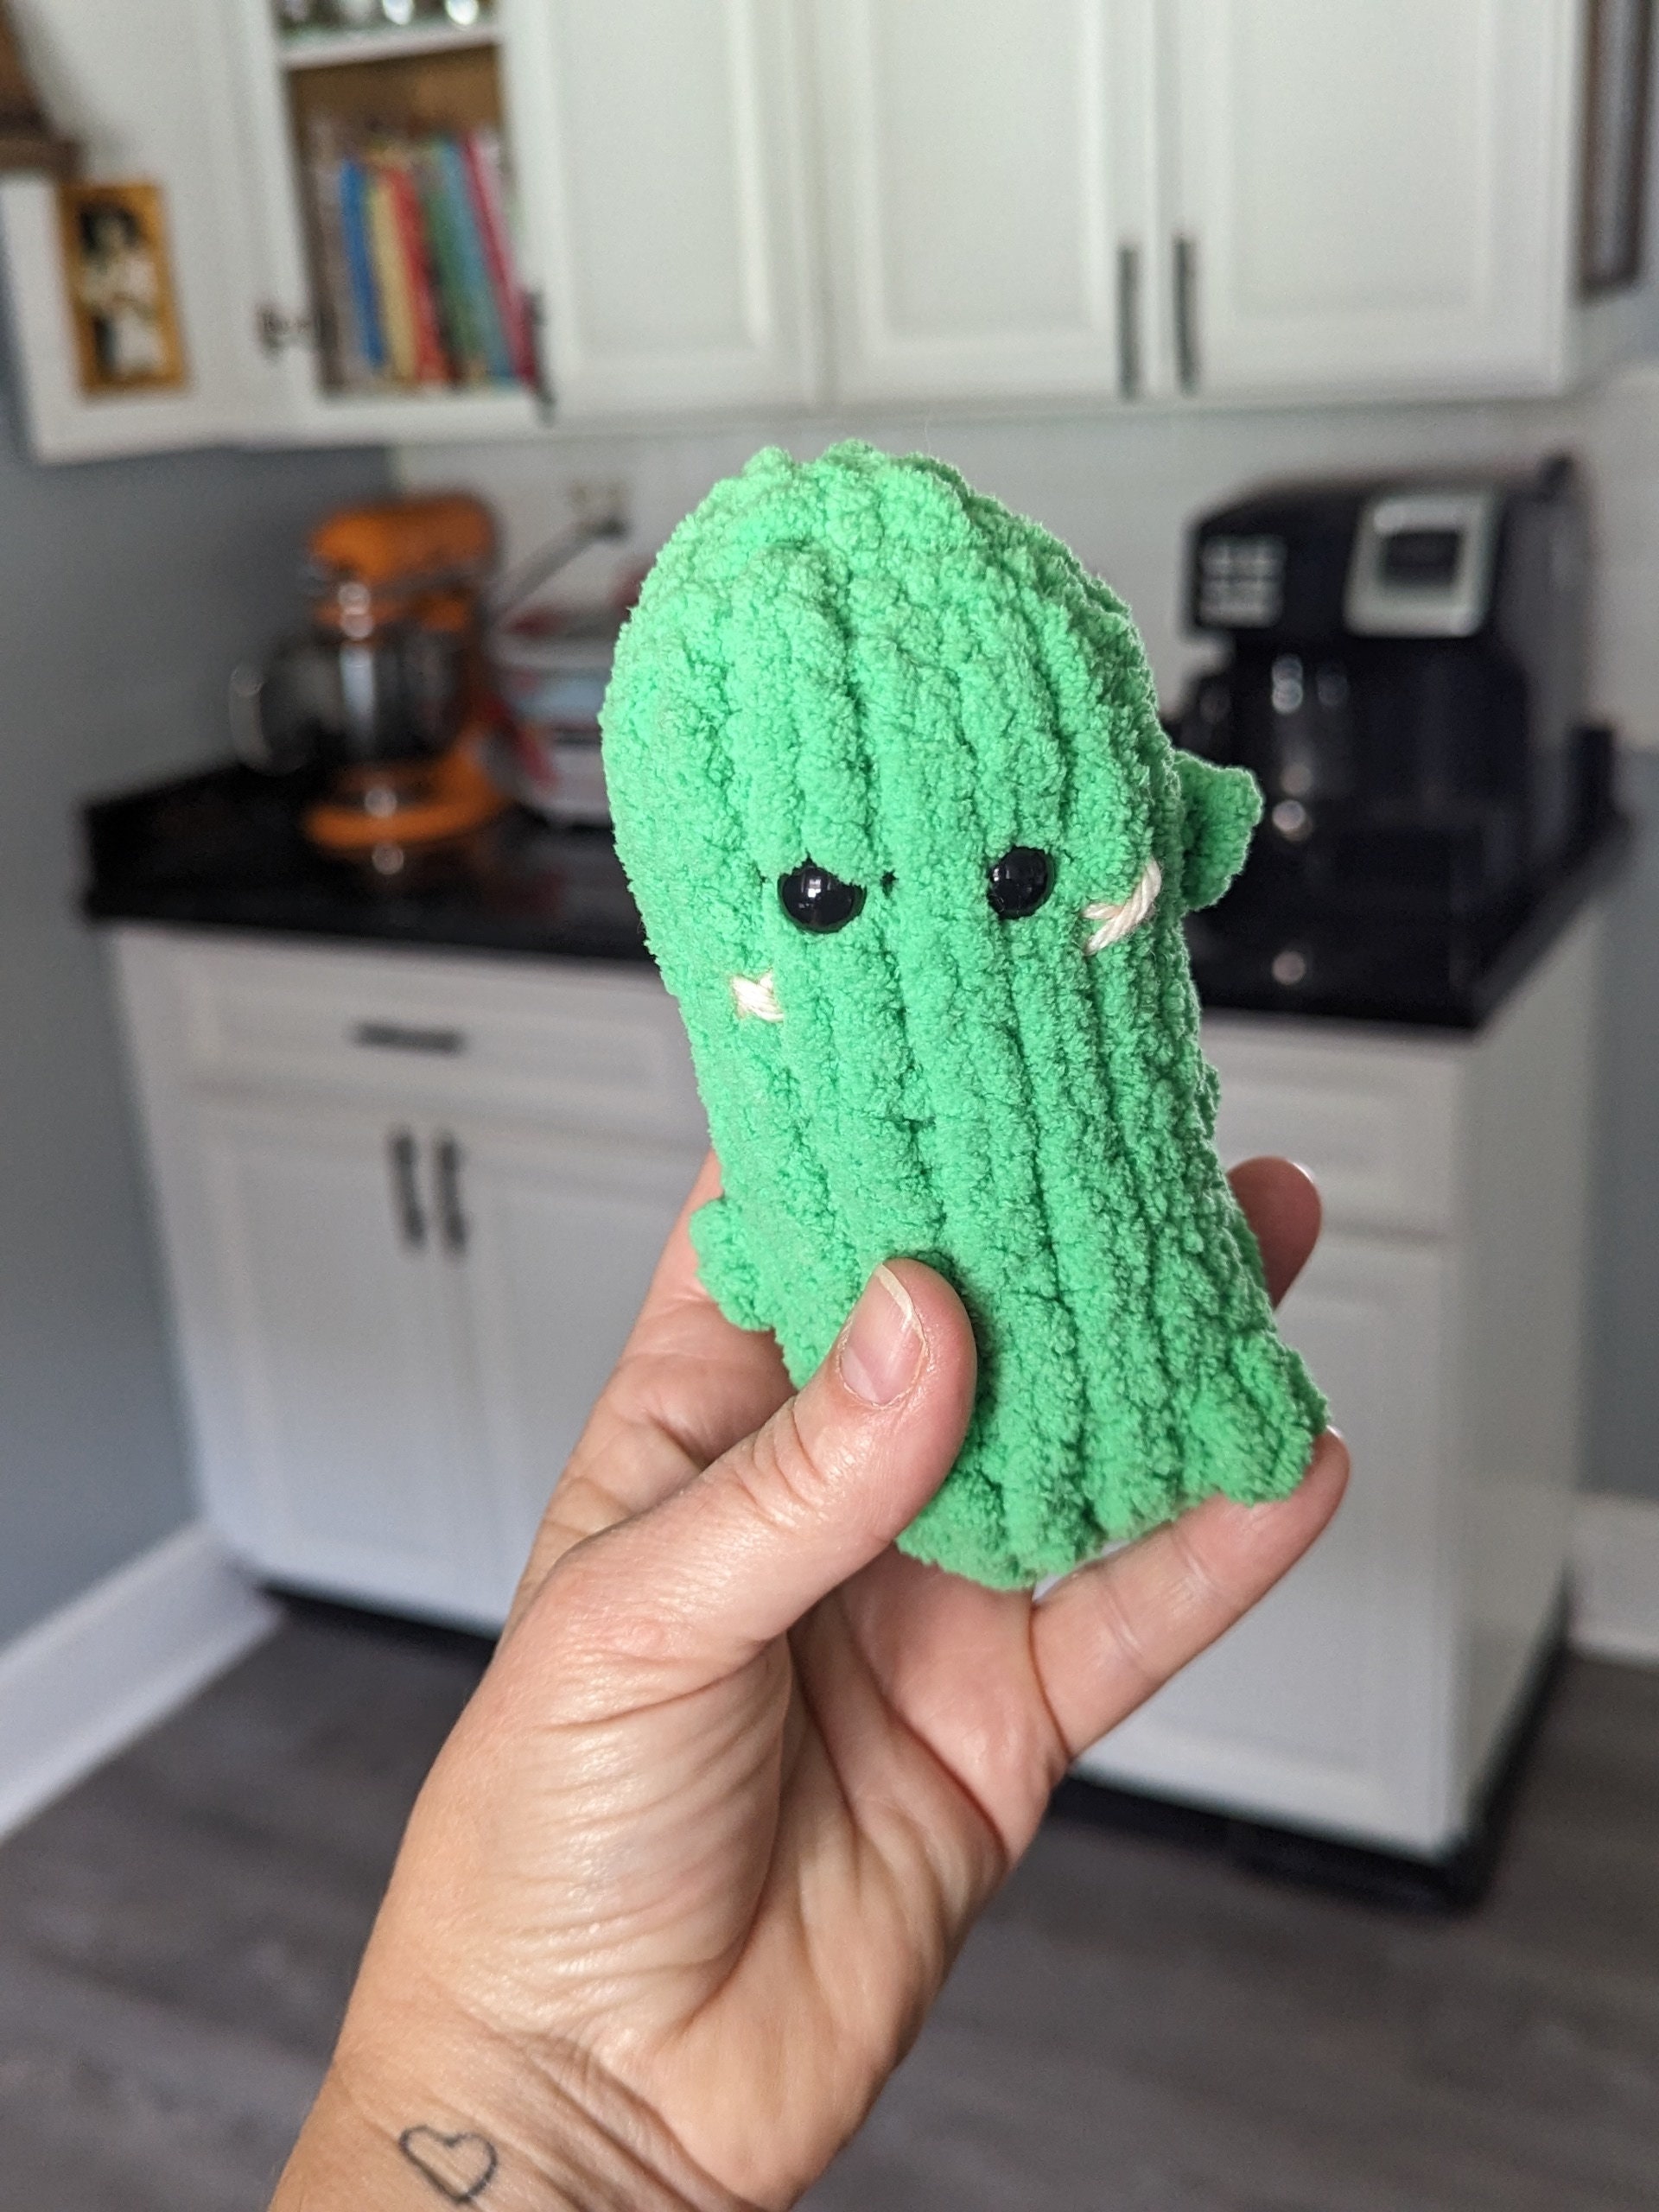 Bulk Sale Crochet Emotional Support Pickles-mental Health Gift for  Family/friends/team-big Dill Pickle-positive Pickle Amigurumi 